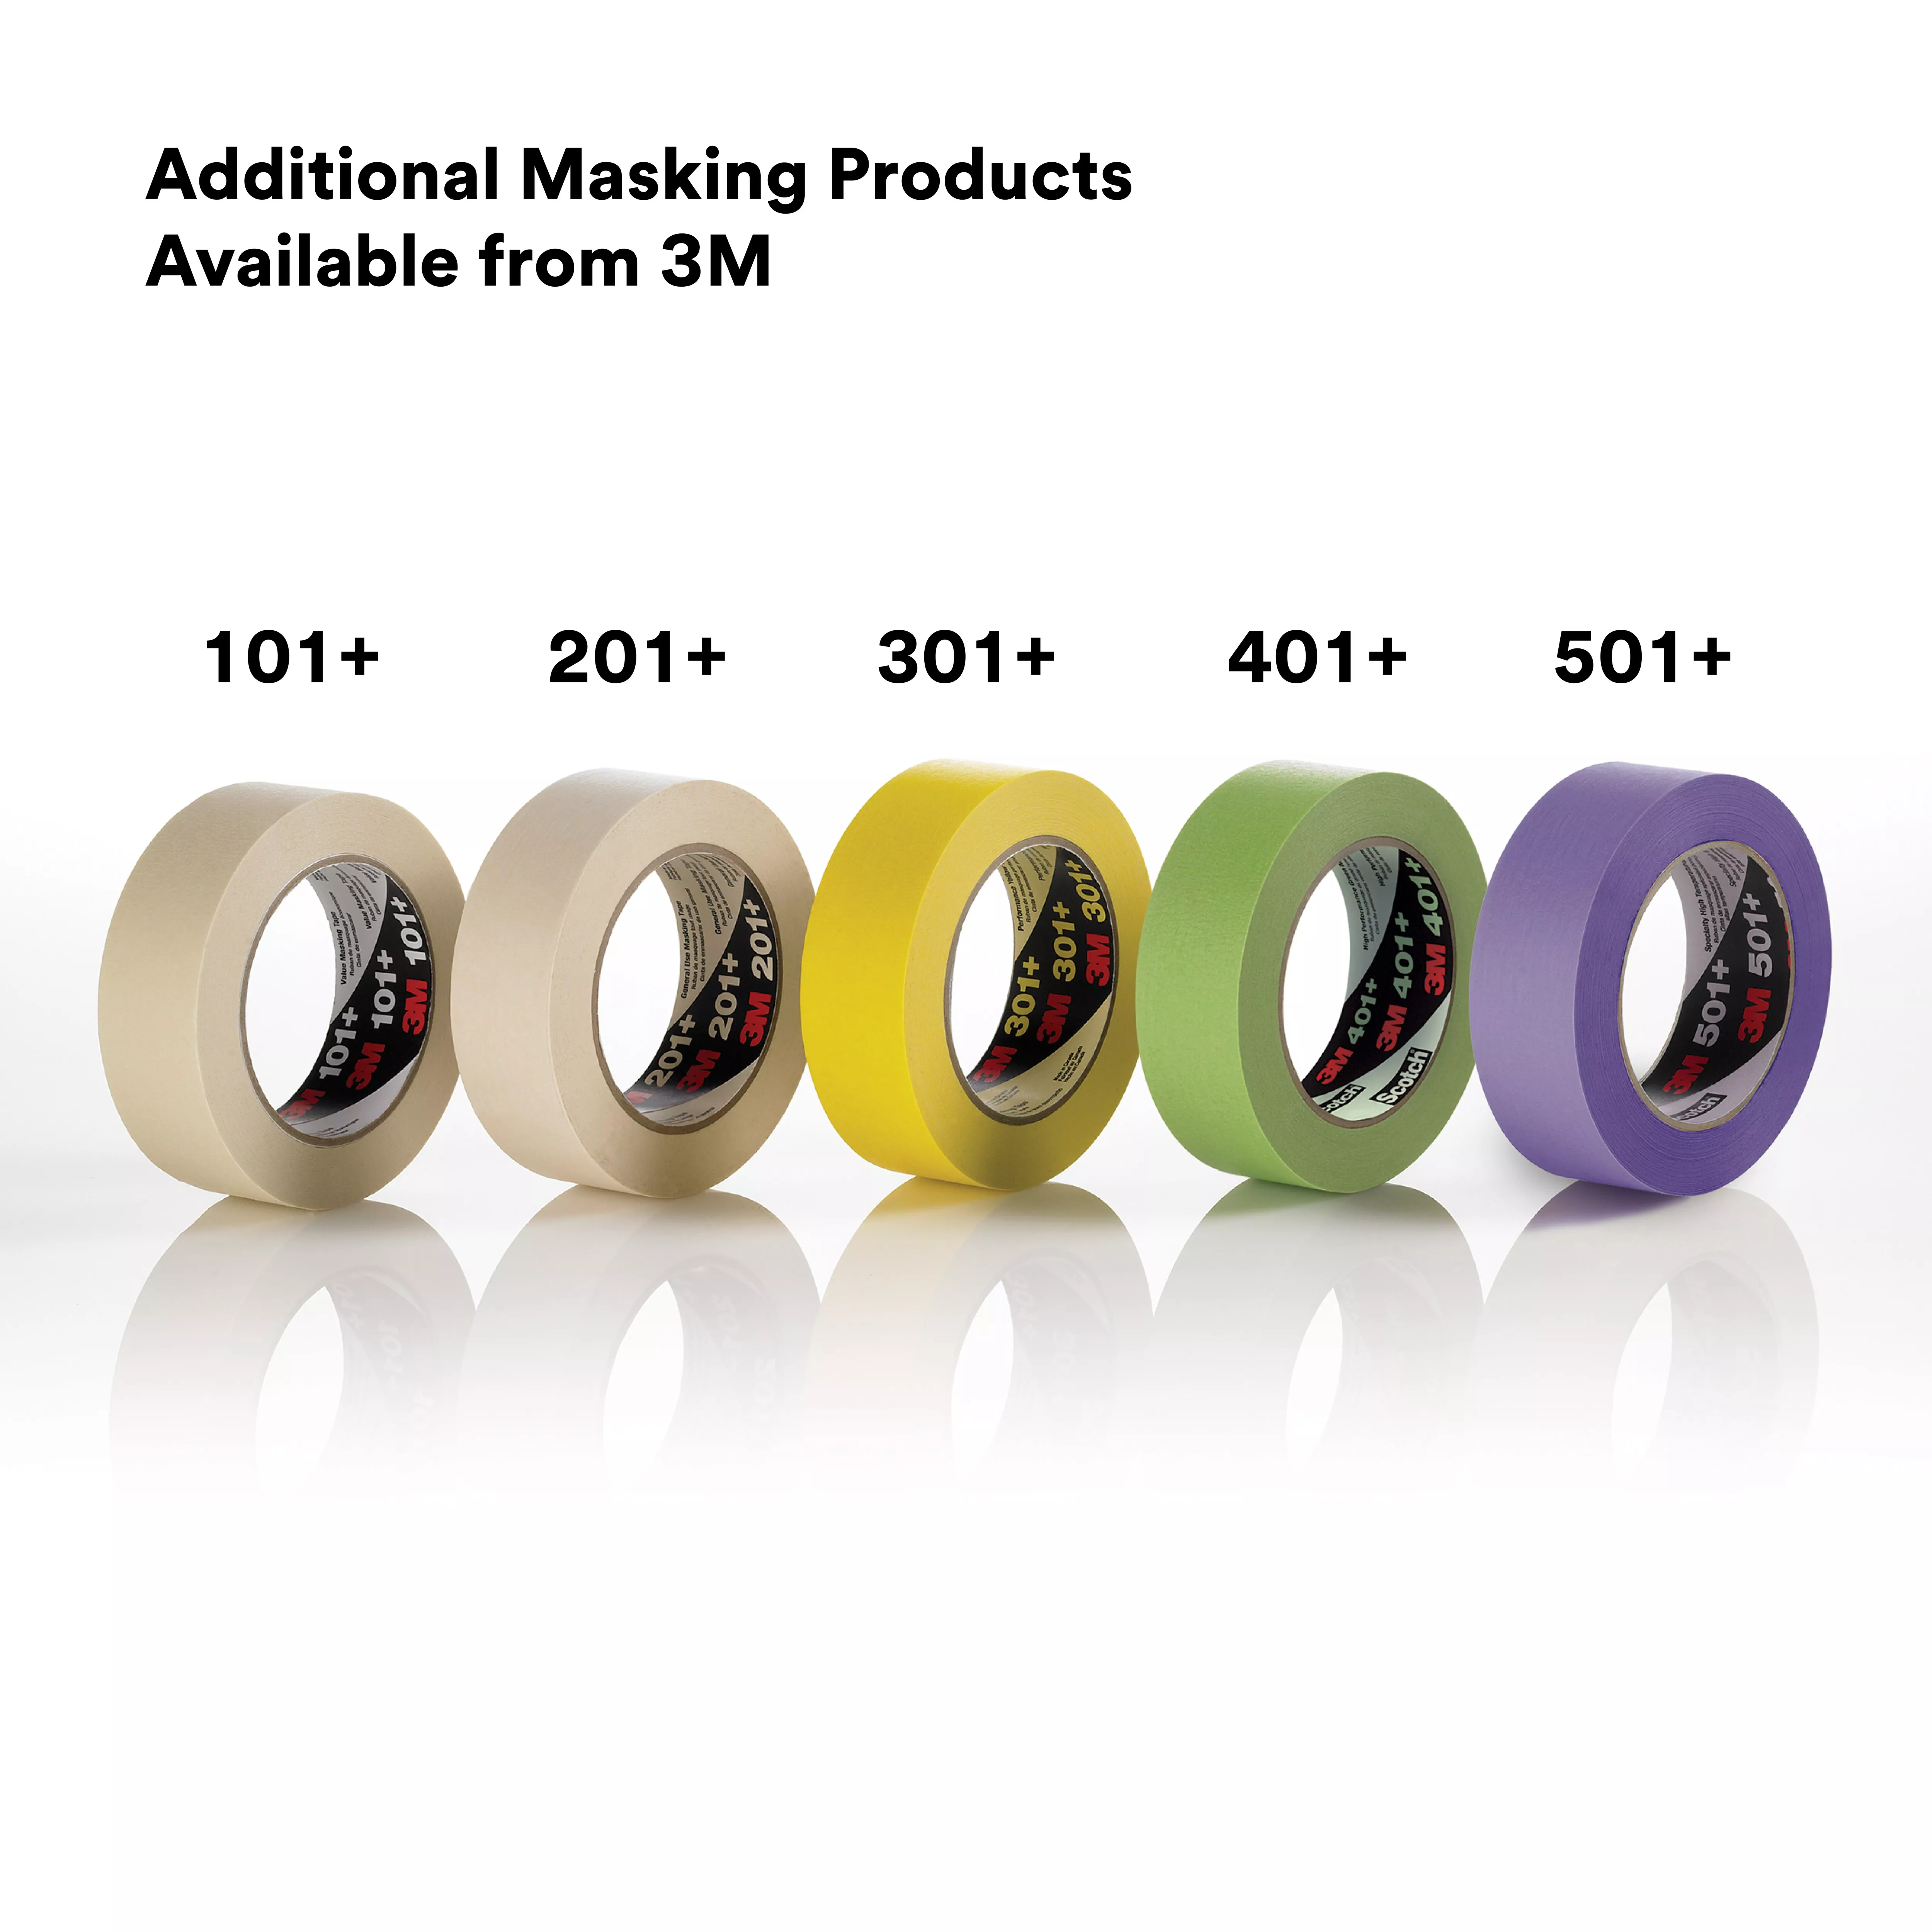 SKU 7100088493 | 3M™ Specialty High Temperature Masking Tape 501+